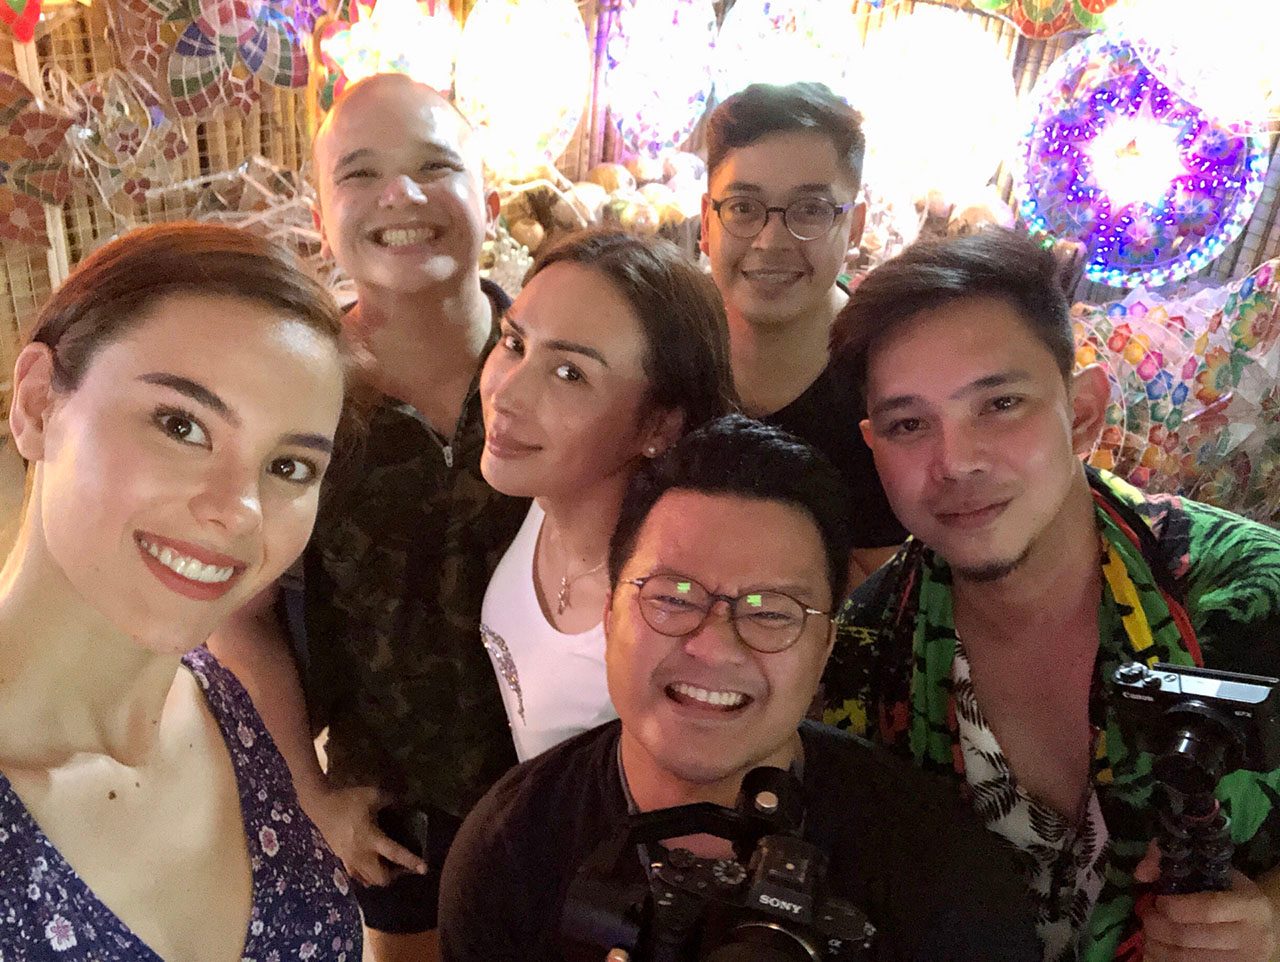 Catching up with Team Catriona Gray